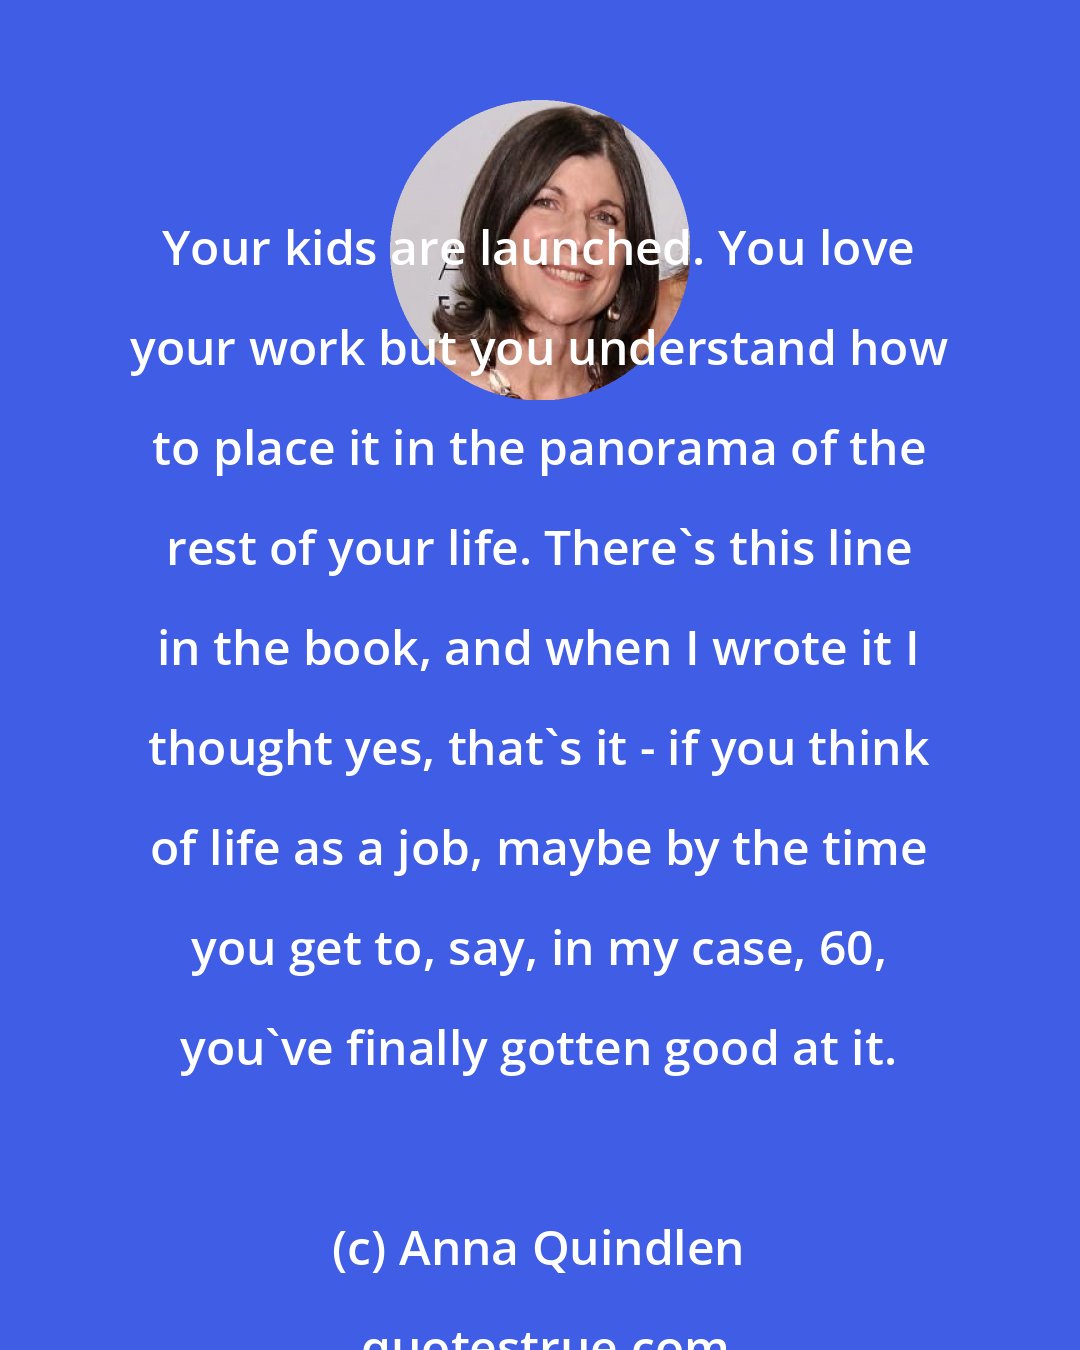 Anna Quindlen: Your kids are launched. You love your work but you understand how to place it in the panorama of the rest of your life. There's this line in the book, and when I wrote it I thought yes, that's it - if you think of life as a job, maybe by the time you get to, say, in my case, 60, you've finally gotten good at it.